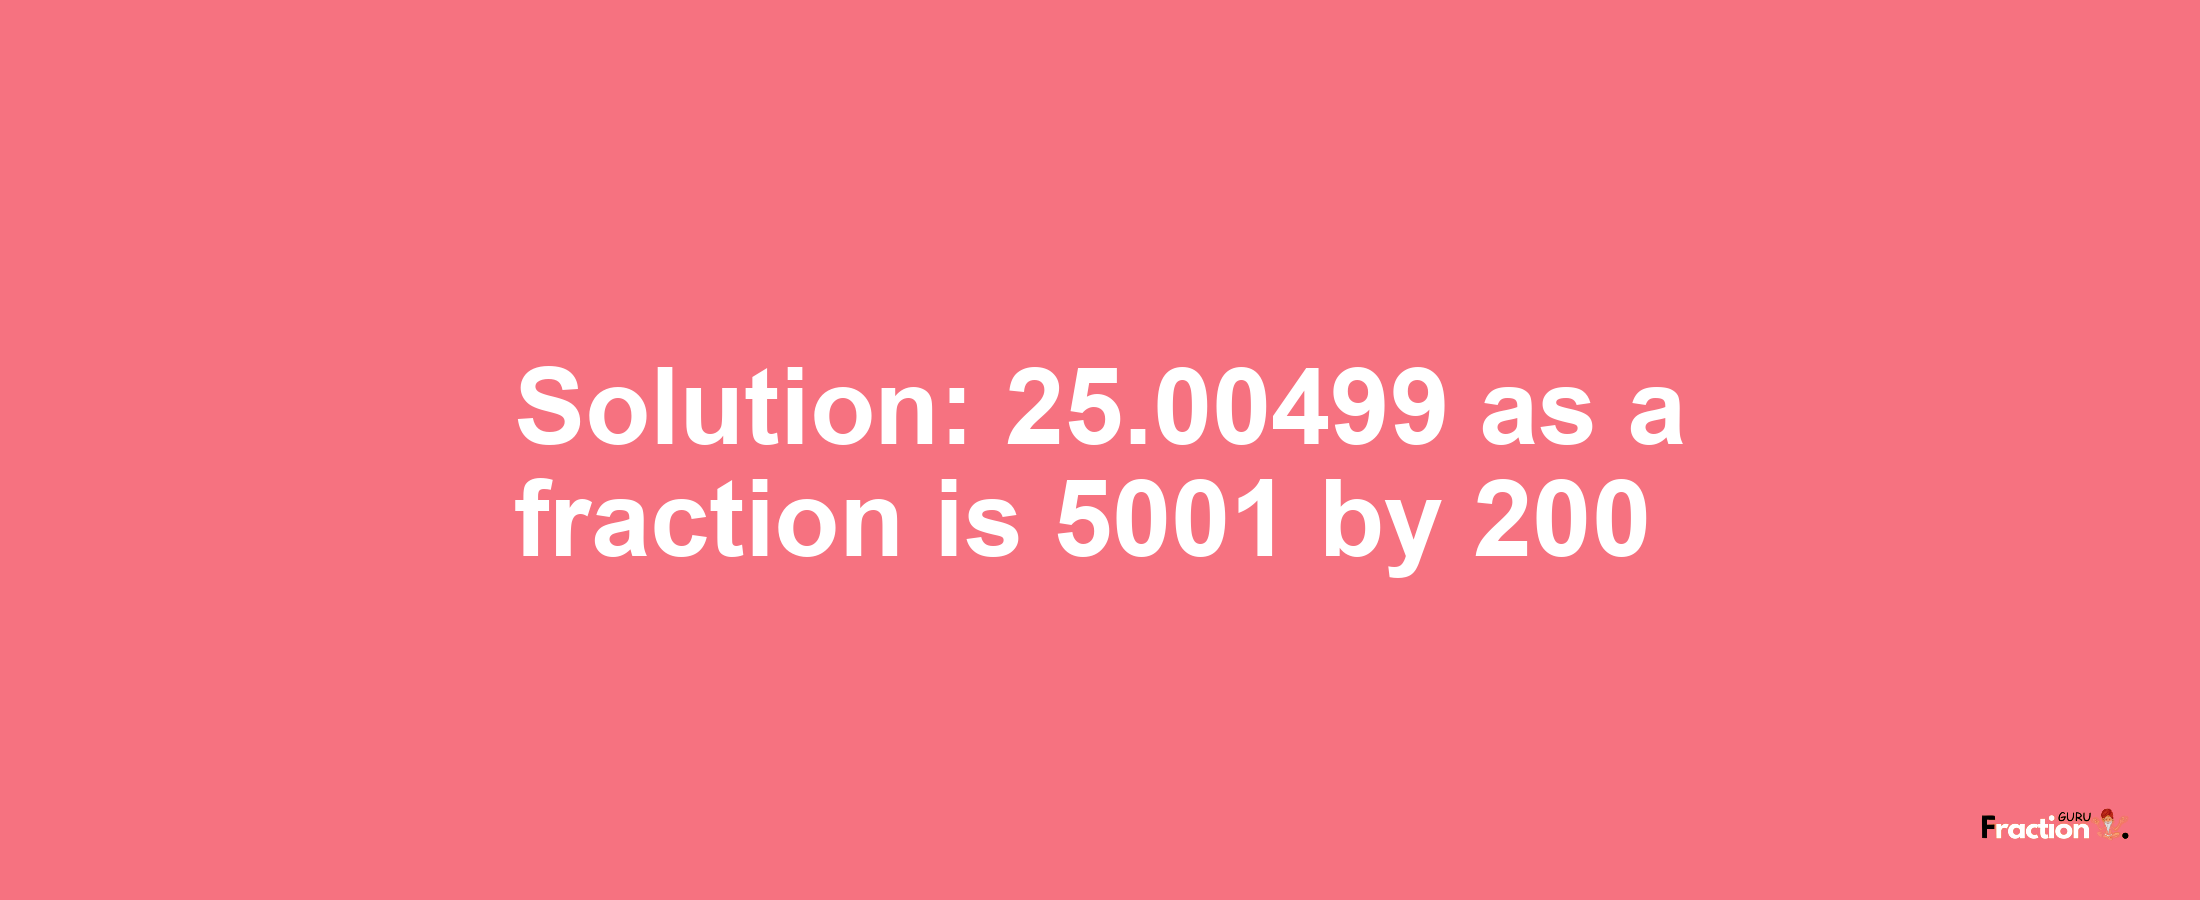 Solution:25.00499 as a fraction is 5001/200